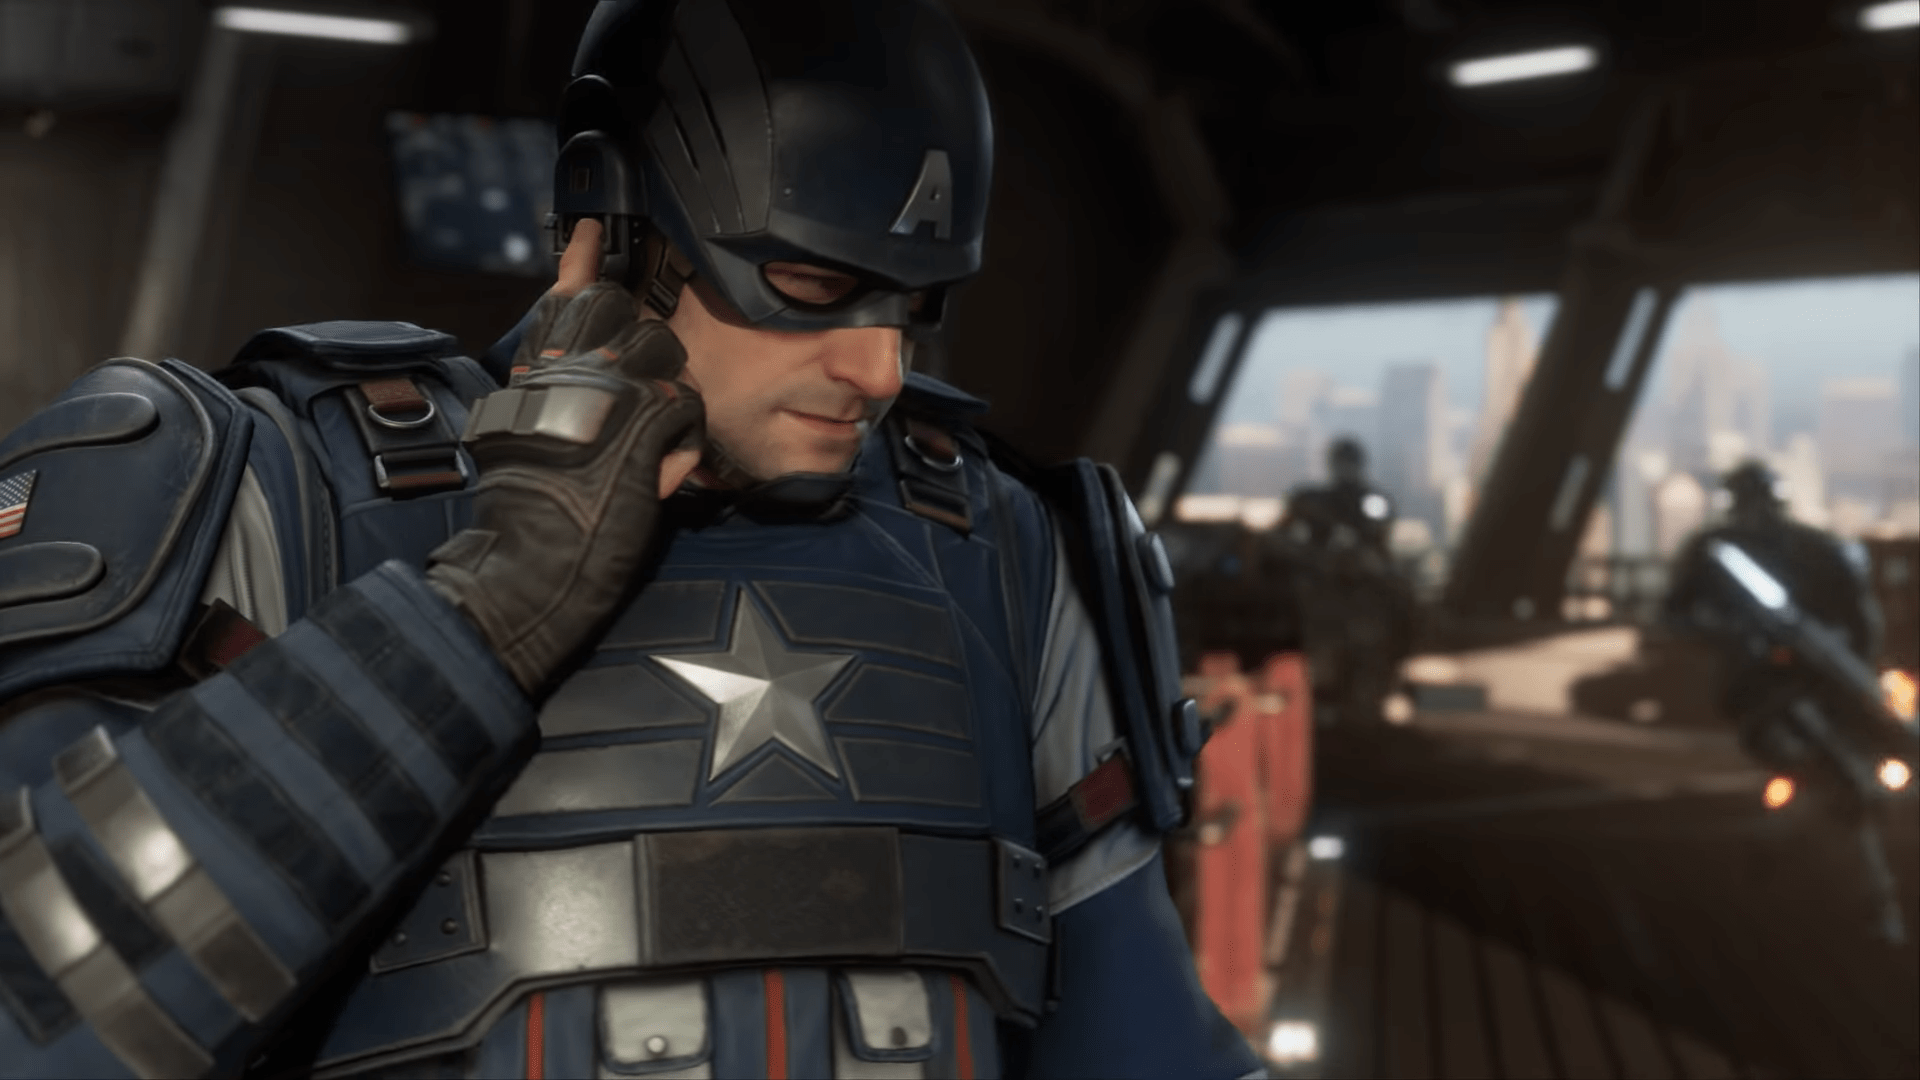 Marvel’s Avengers’ Latest Patch Includes New Content And Quality Of Life Improvements